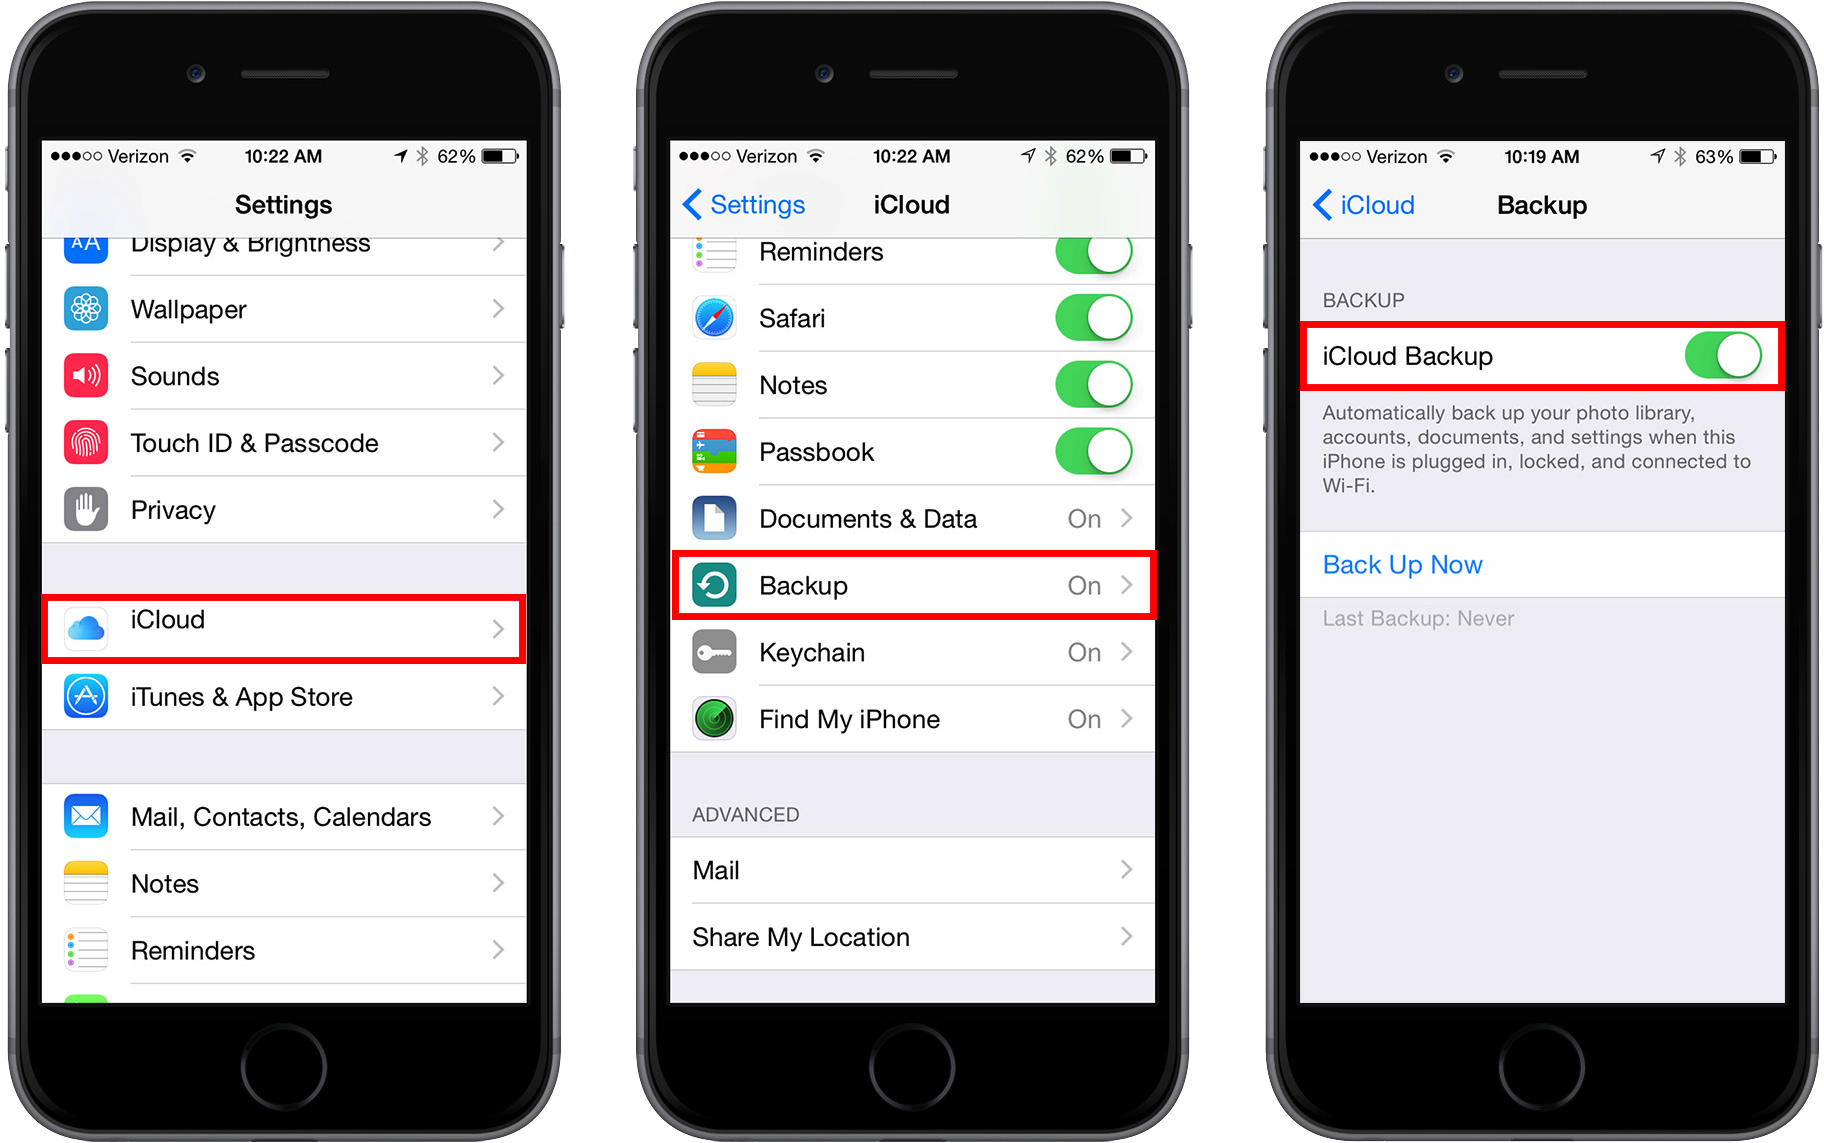 How to Backup iPhone 4s/5/5s/5c with iCloud